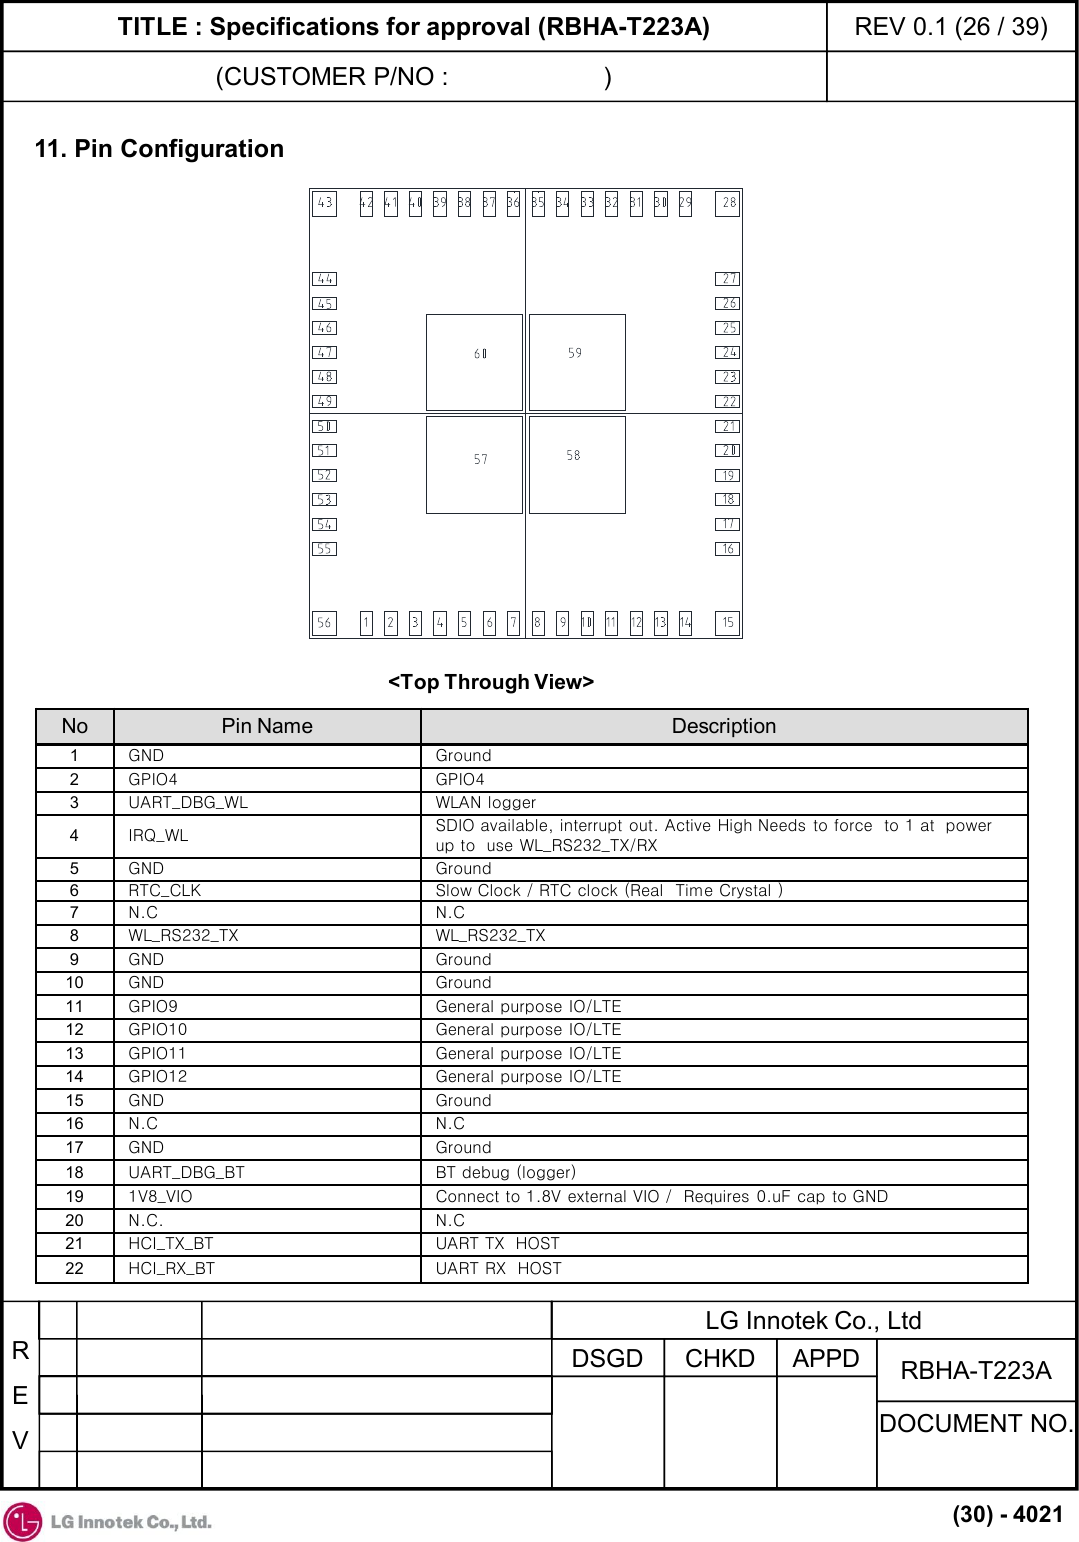 TITLE : Specifications for approval (RBHA-T223A)(CUSTOMER P/NO :                      )REV 0.1 (26 / 39)REVAPPDCHKDDSGDDOCUMENT NO.RBHA-T223ALG Innotek Co., Ltd(30) - 402111. Pin Configuration&lt;Top Through View&gt;No Pin Name Description1GND Ground2GPIO4 GPIO43UART_DBG_WL WLAN logger 4IRQ_WL SDIO available, interrupt out. Active High Needs to force  to 1 at  power up to  use WL_RS232_TX/RX5GND Ground6RTC_CLK Slow Clock / RTC clock (Real  Time Crystal )7N.C N.C8WL_RS232_TX WL_RS232_TX9GND Ground10 GND Ground11 GPIO9 General purpose IO/LTE12 GPIO10 General purpose IO/LTE13 GPIO11 General purpose IO/LTE14 GPIO12 General purpose IO/LTE15 GND Ground 16 N.C N.C17 GND Ground18 UART_DBG_BT BT debug (logger)19 1V8_VIO Connect to 1.8V external VIO /  Requires 0.uF cap to GND20 N.C. N.C21 HCI_TX_BT UART TX  HOST 22 HCI_RX_BT UART RX  HOST 